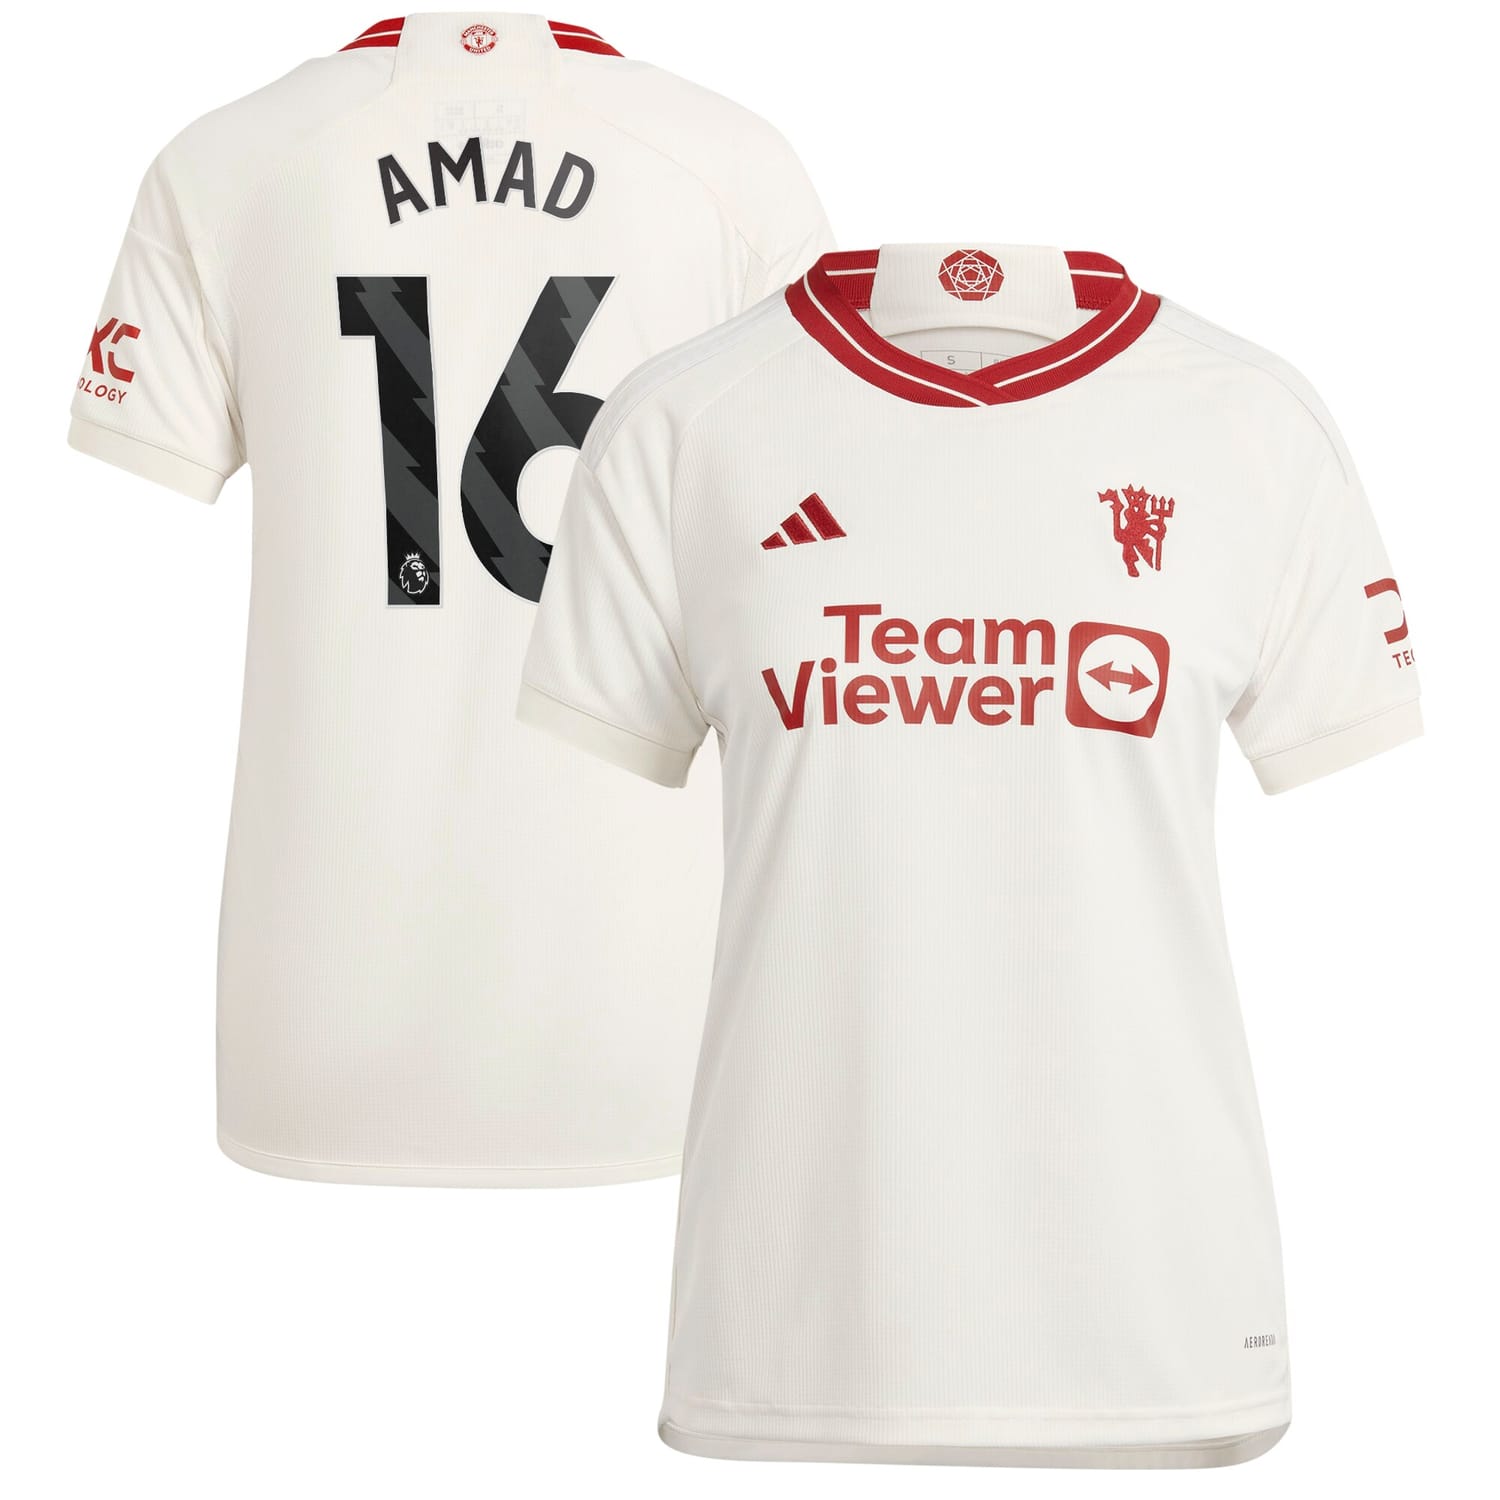 Premier League Manchester United Third Jersey Shirt 2023-24 player Amad Diallo printing for Women